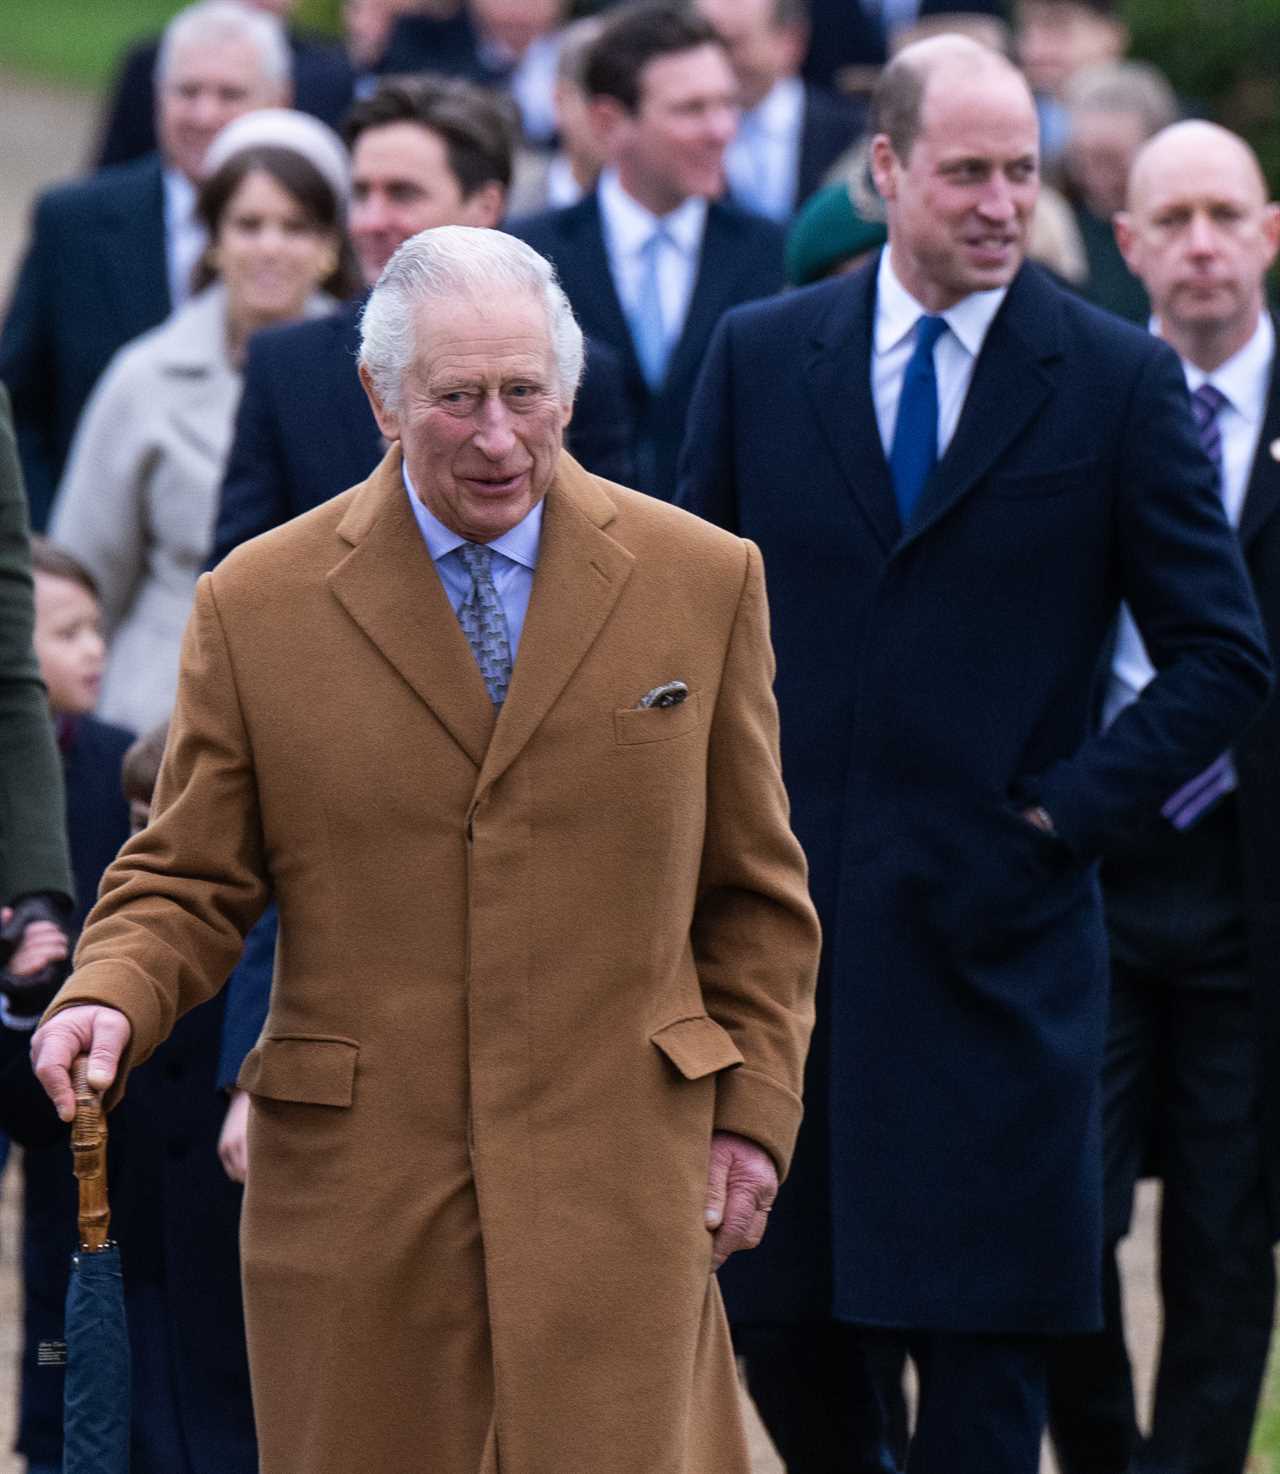 Prince William granted 'special permission' by King Charles after cancer diagnosis